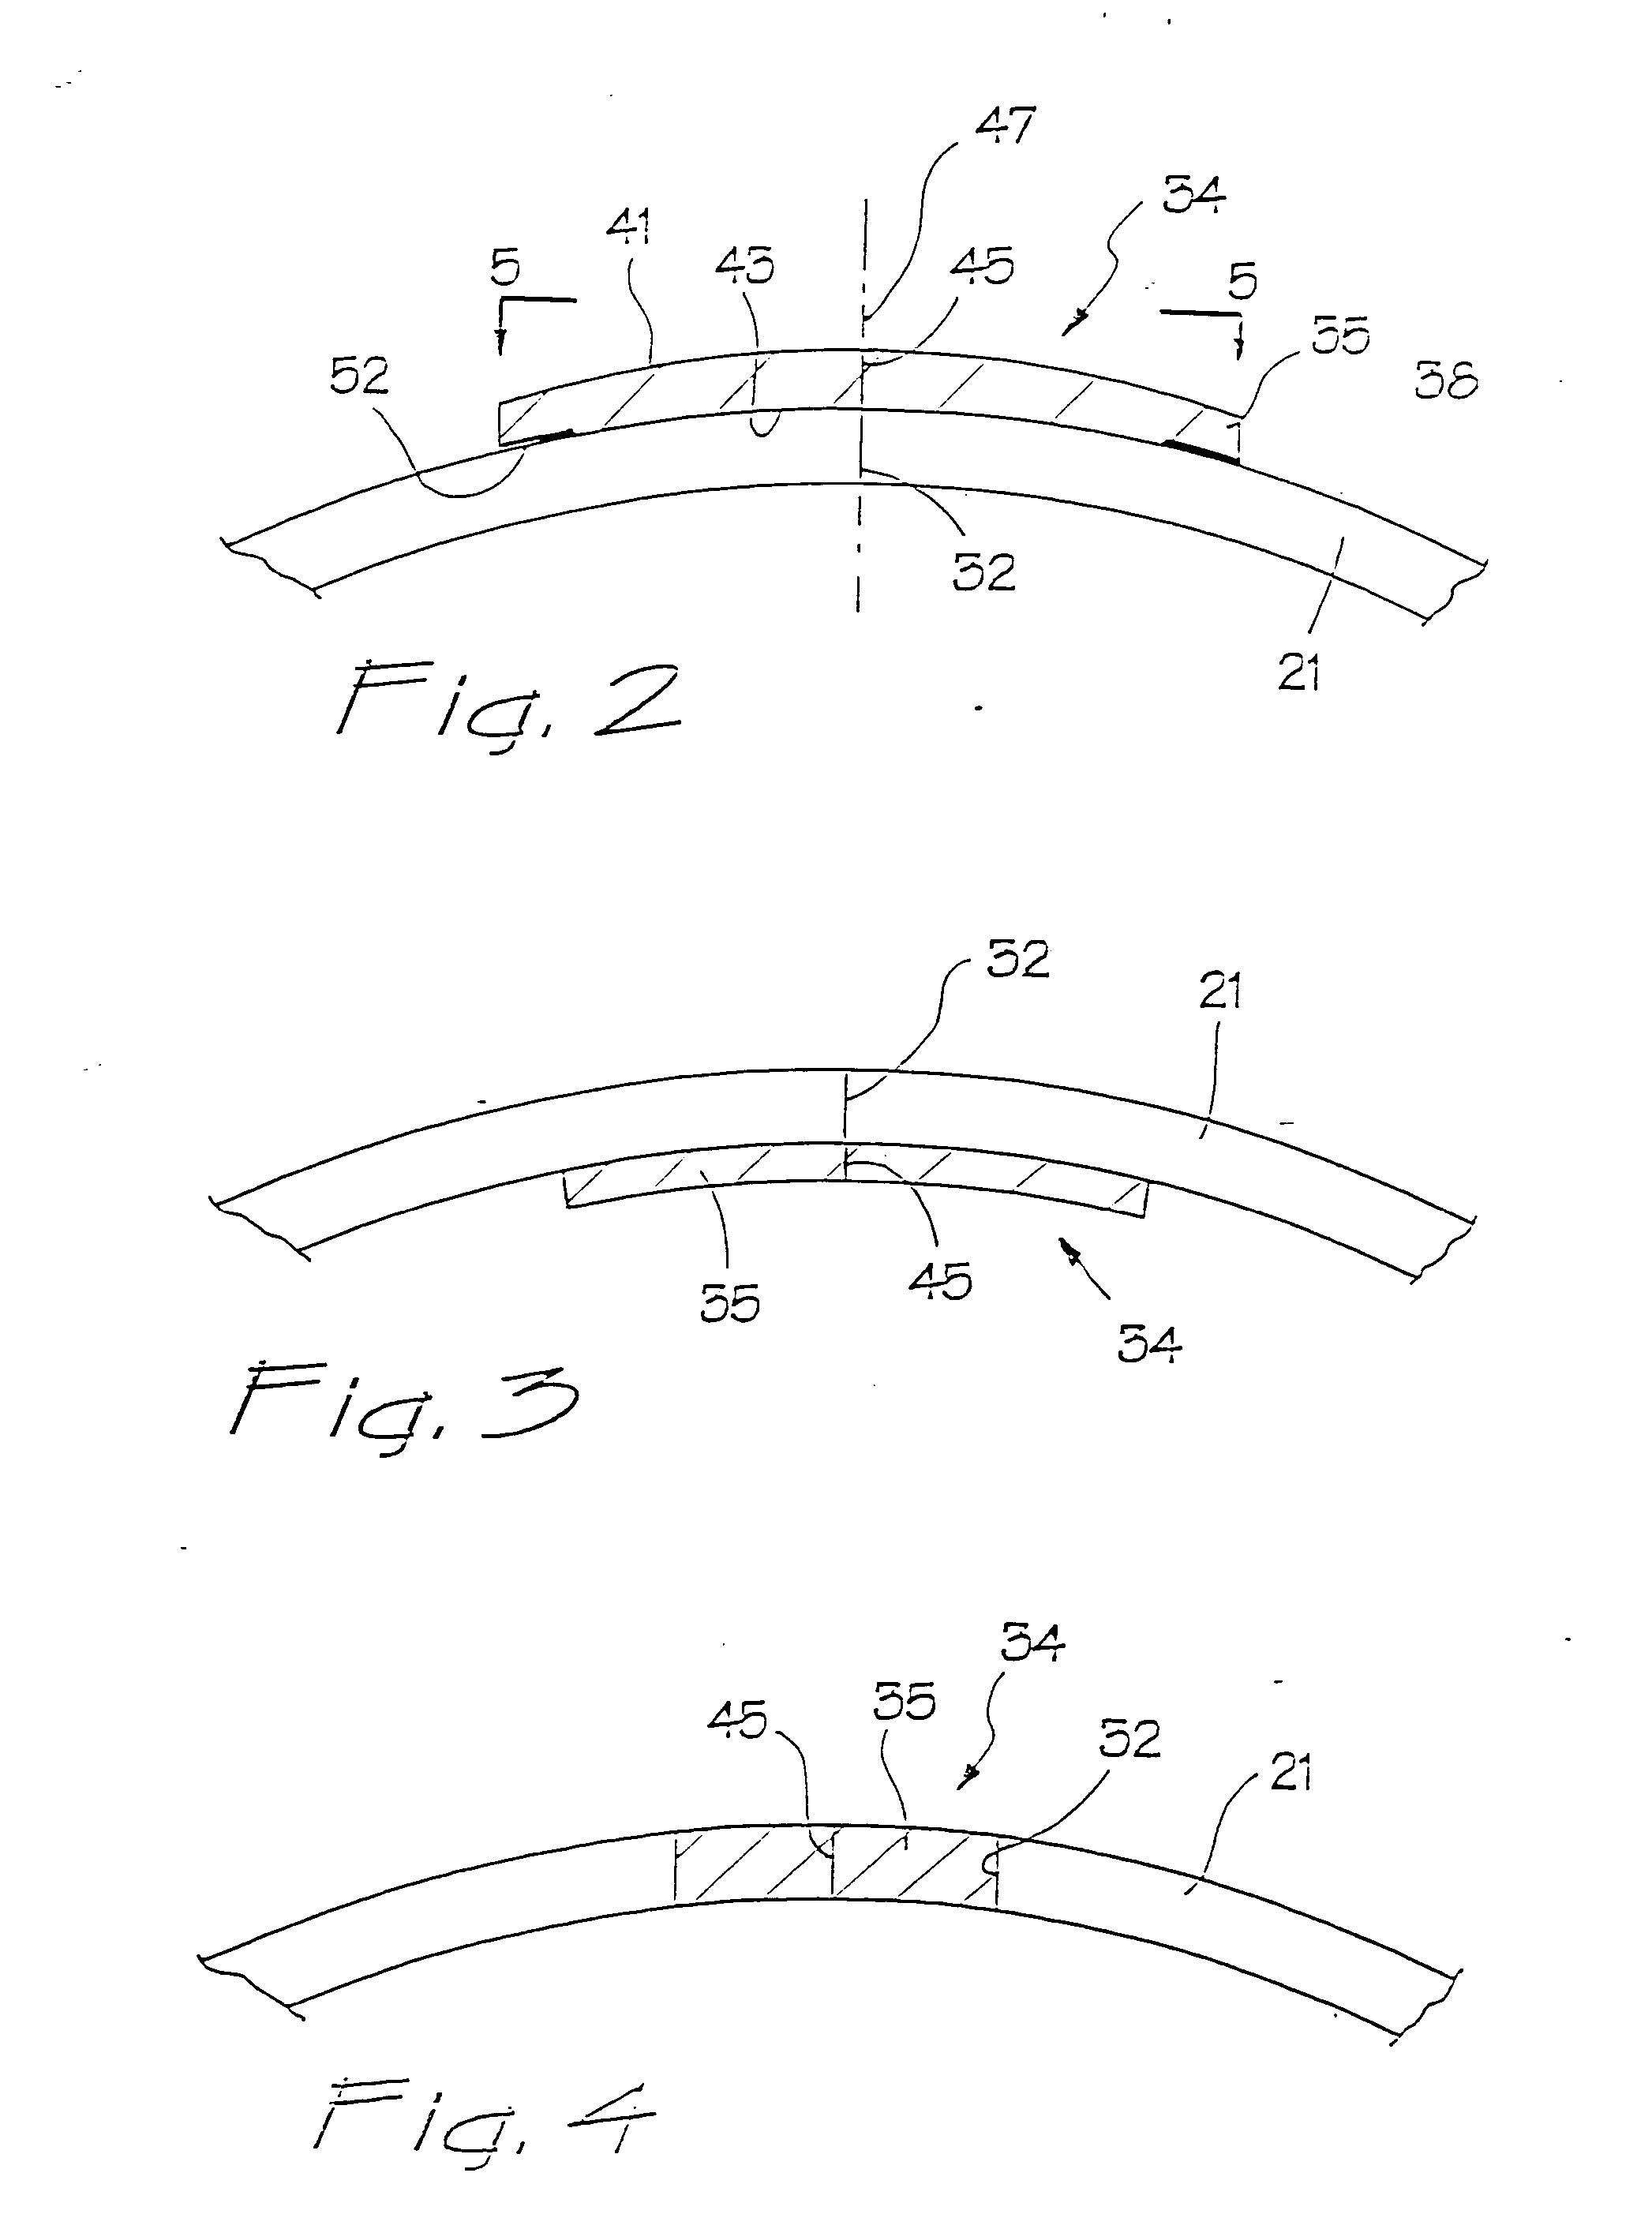 Surgical access apparatus and method